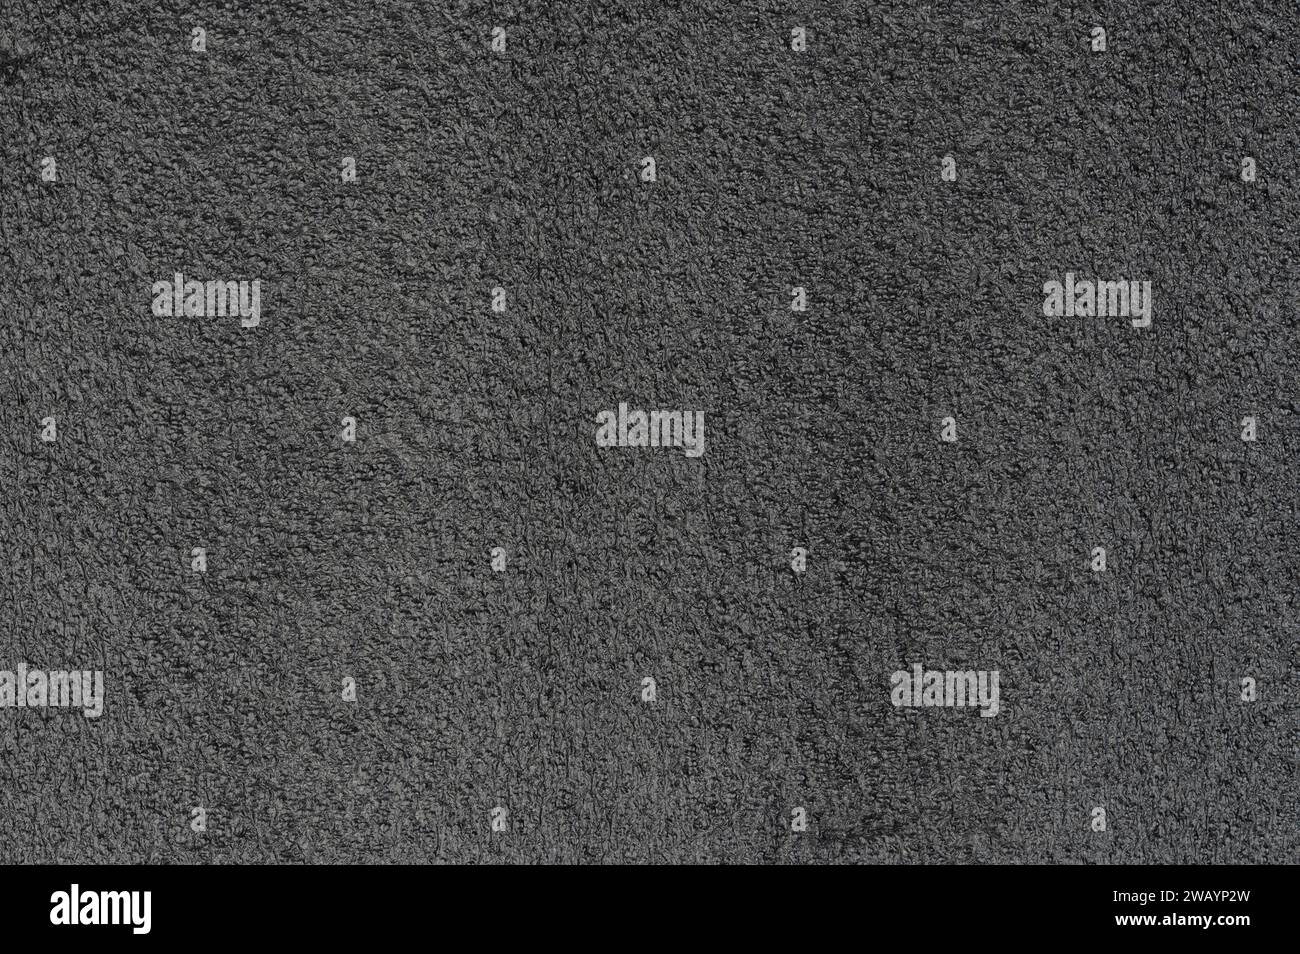 Polystyrene soft grey rough texture pattern close up view Stock Photo